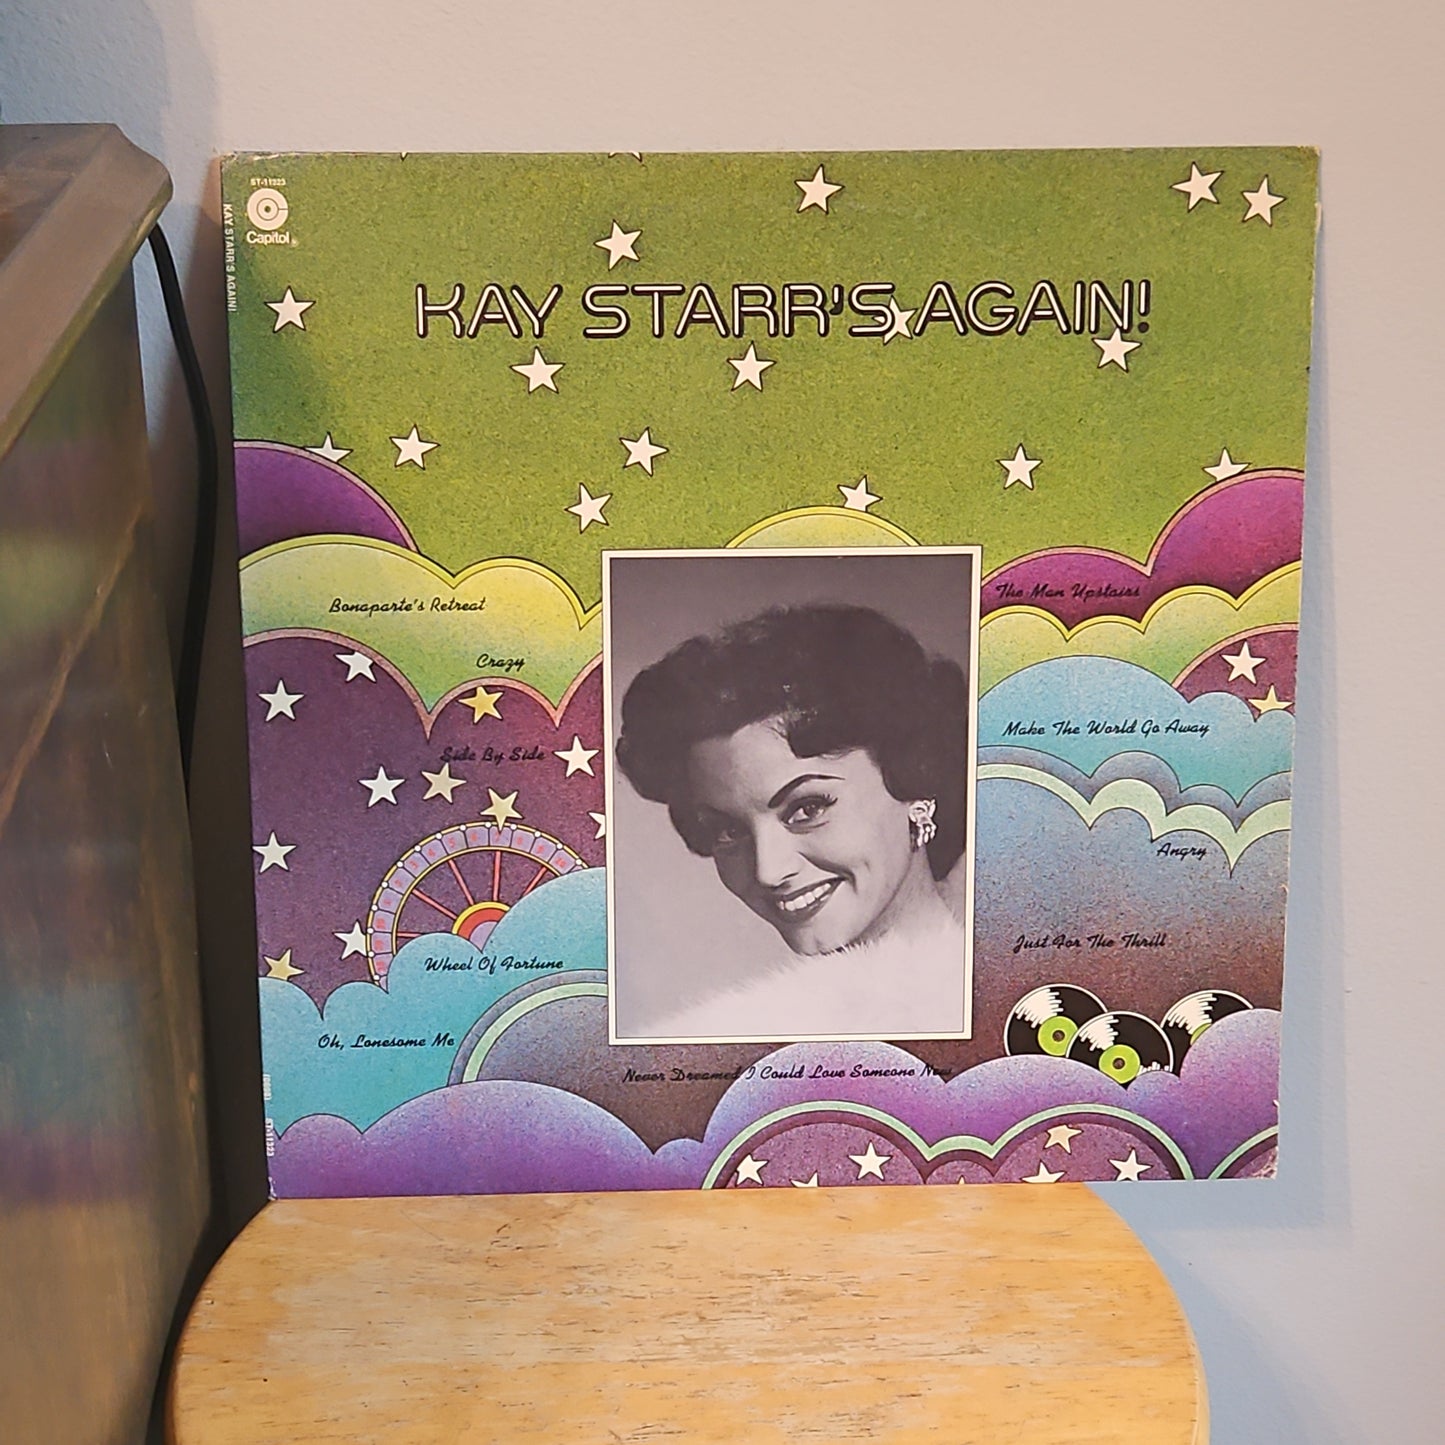 Kay Starr's Again By Capitol Records